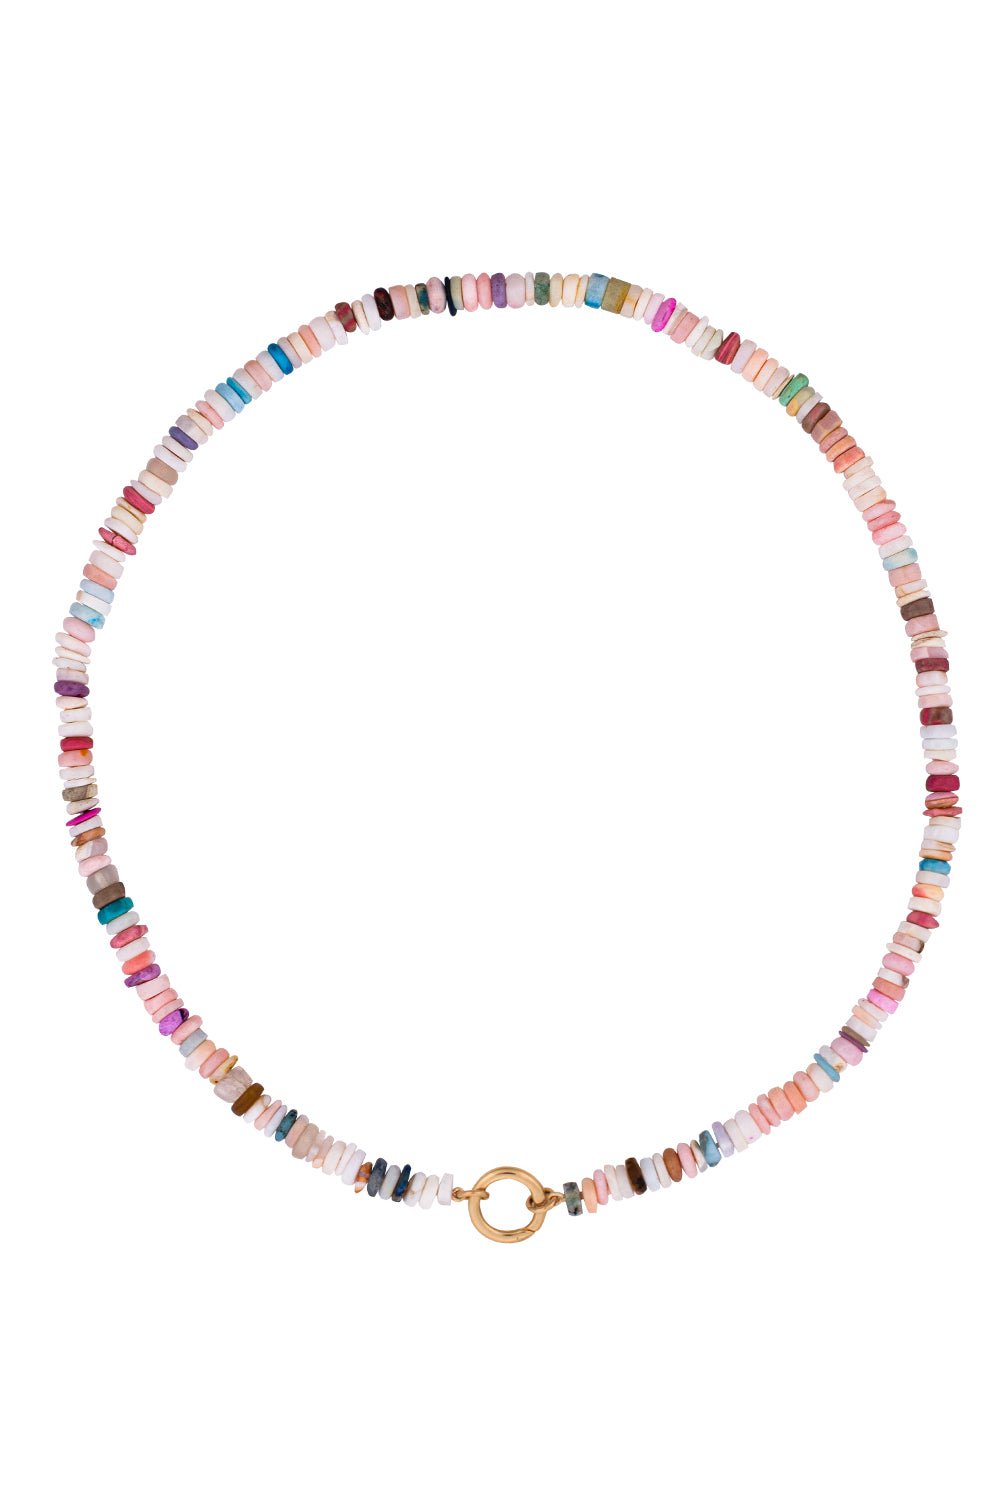 ZOE CHICCO-Light Tone Mixed Opal Bead Necklace-YELLOW GOLD